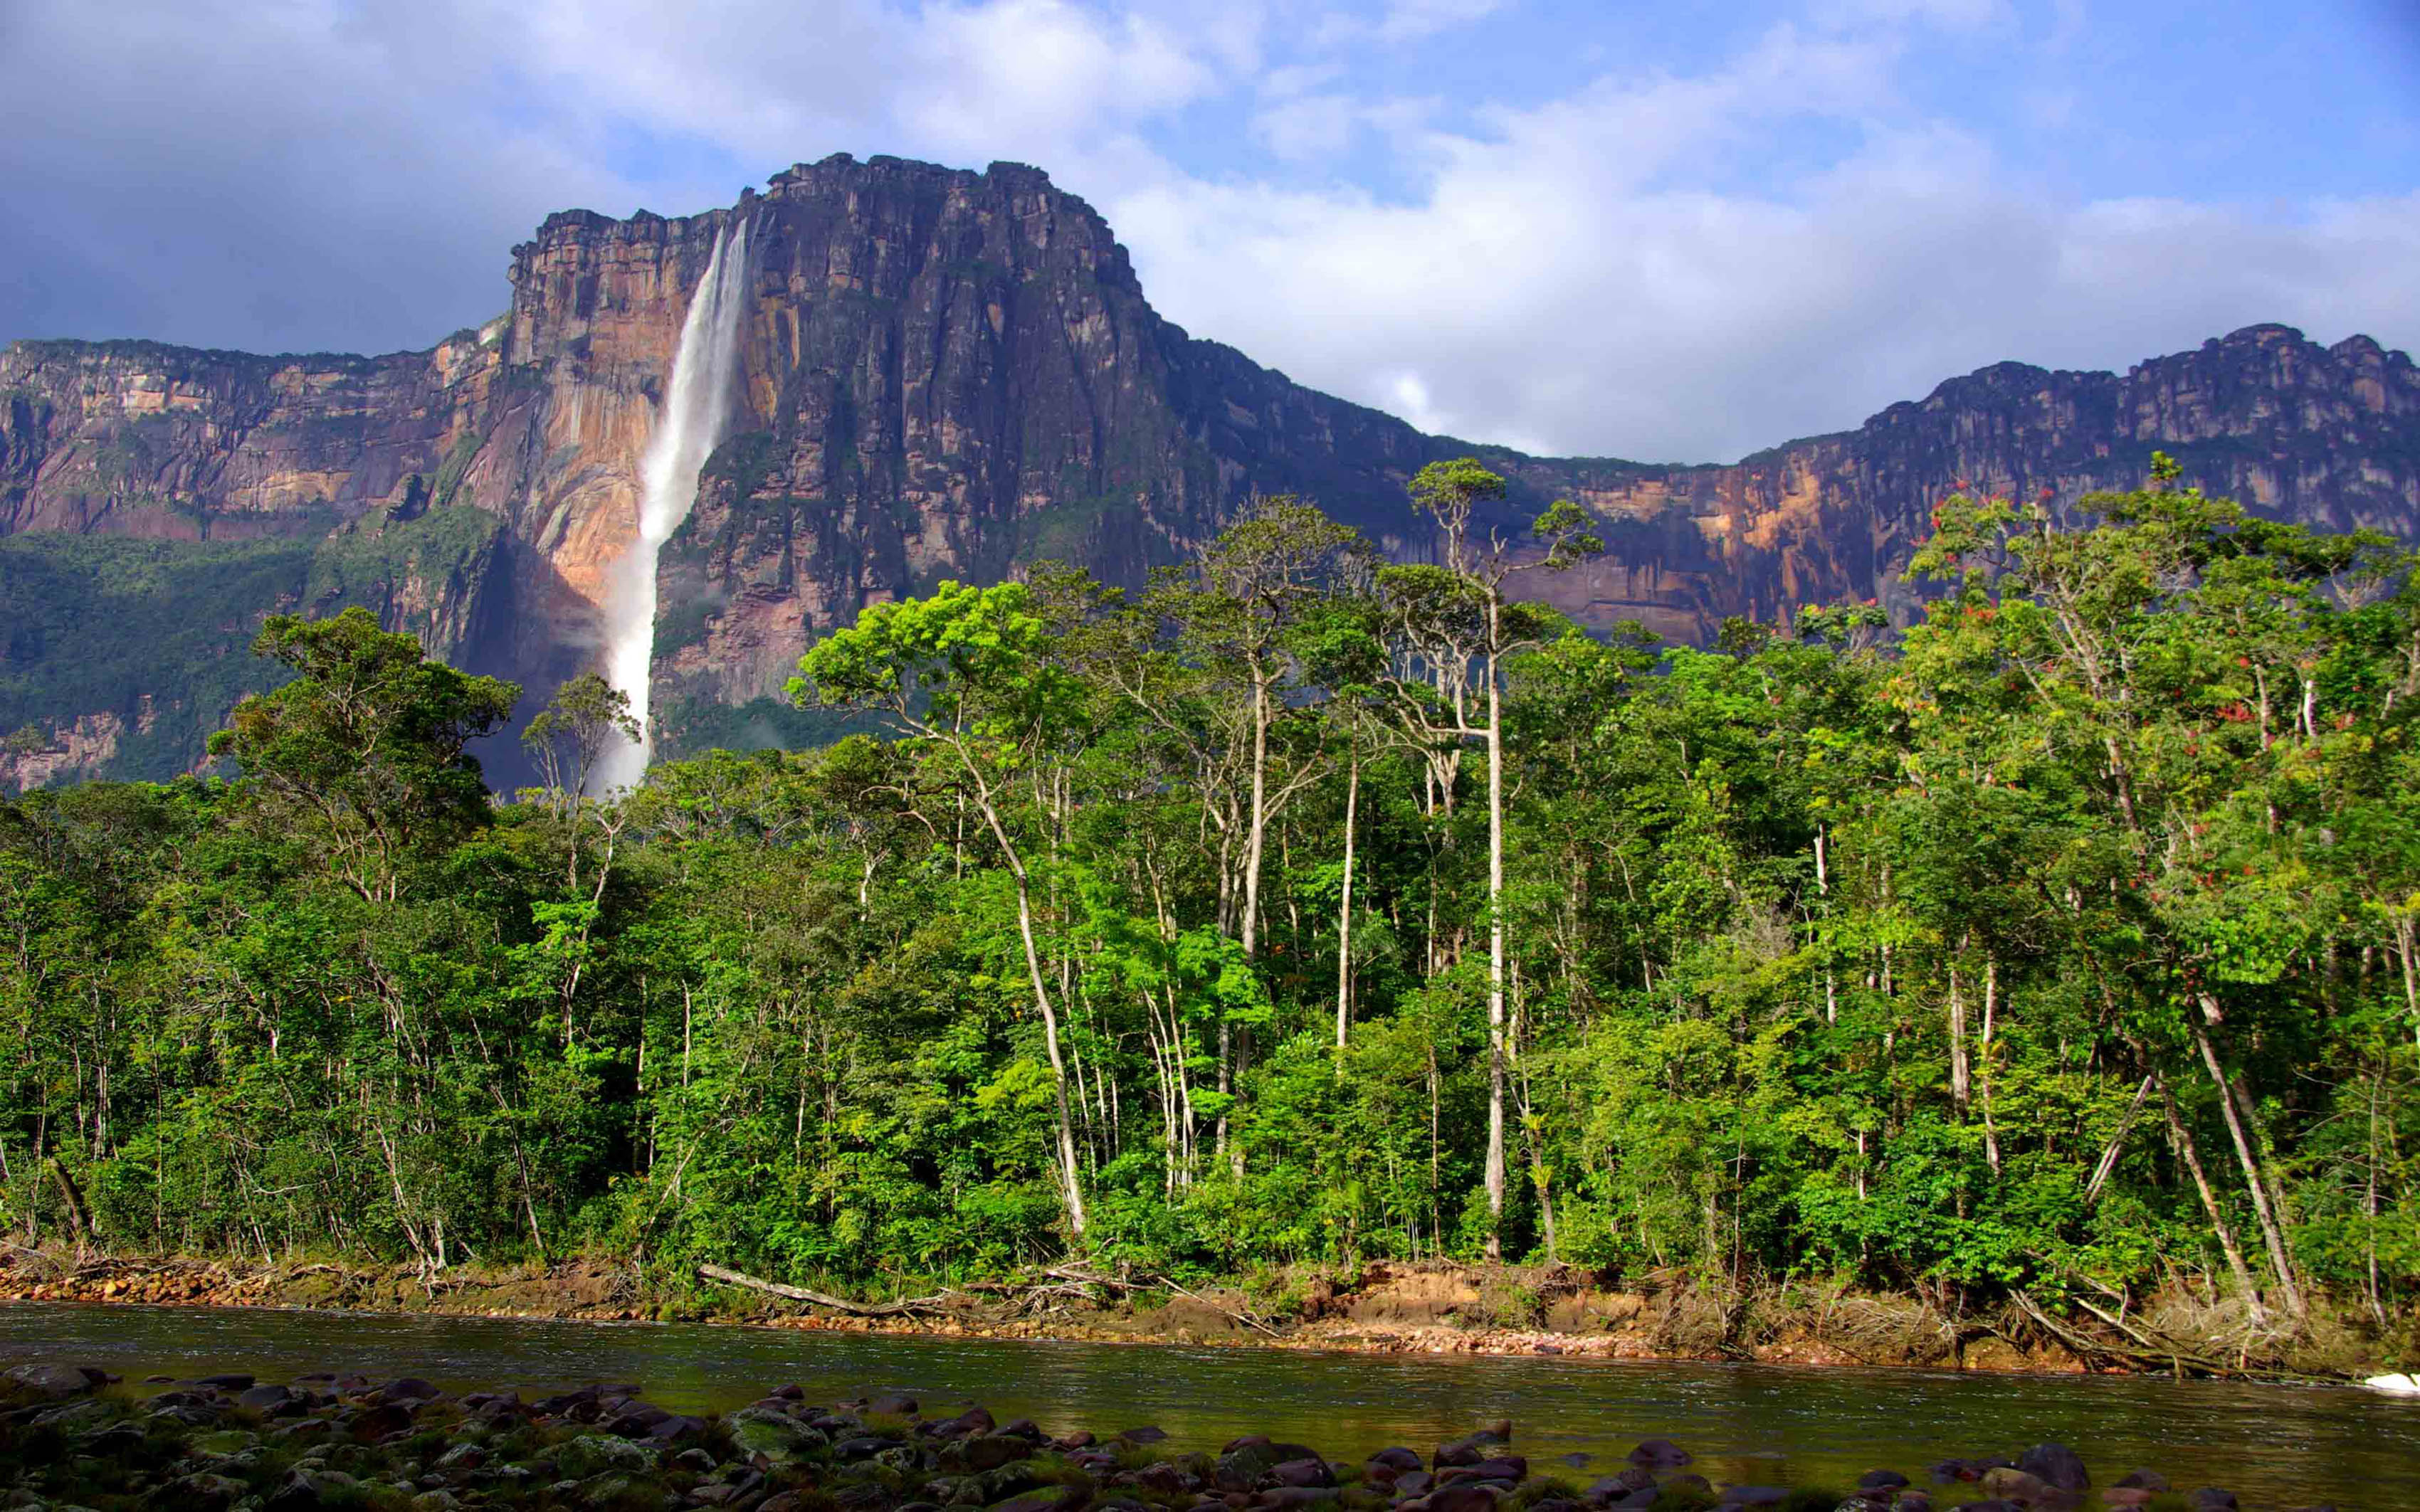 3400x2125 Angel Falls In Venezuela High Rocky Mountains, Tropical Forest With Tall Green Trees, River Desktop Wallpaper Hd For Mobile Phones And Laptops :